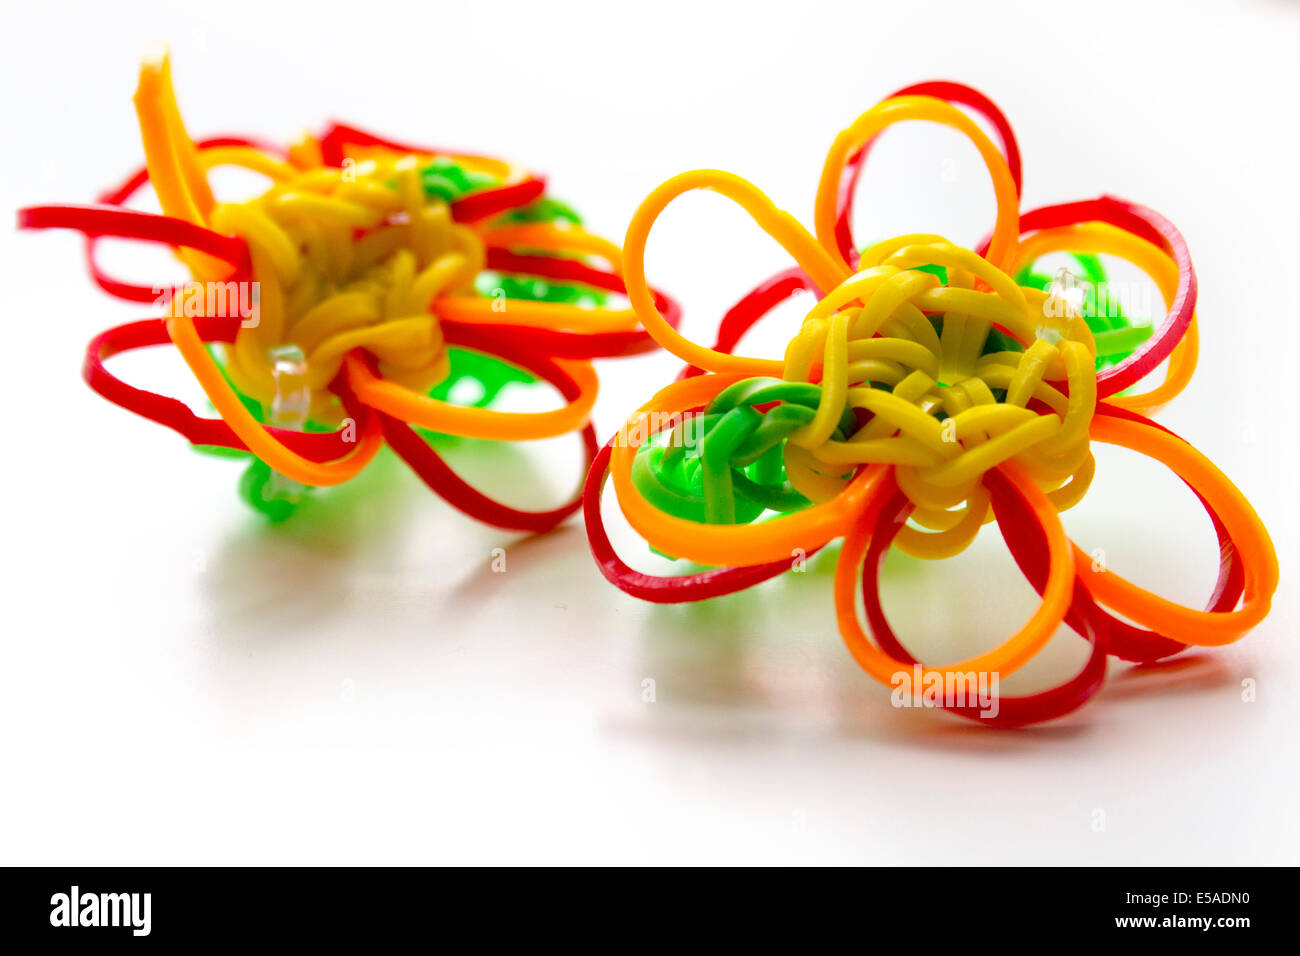 Rubber band flower ring Stock Photo